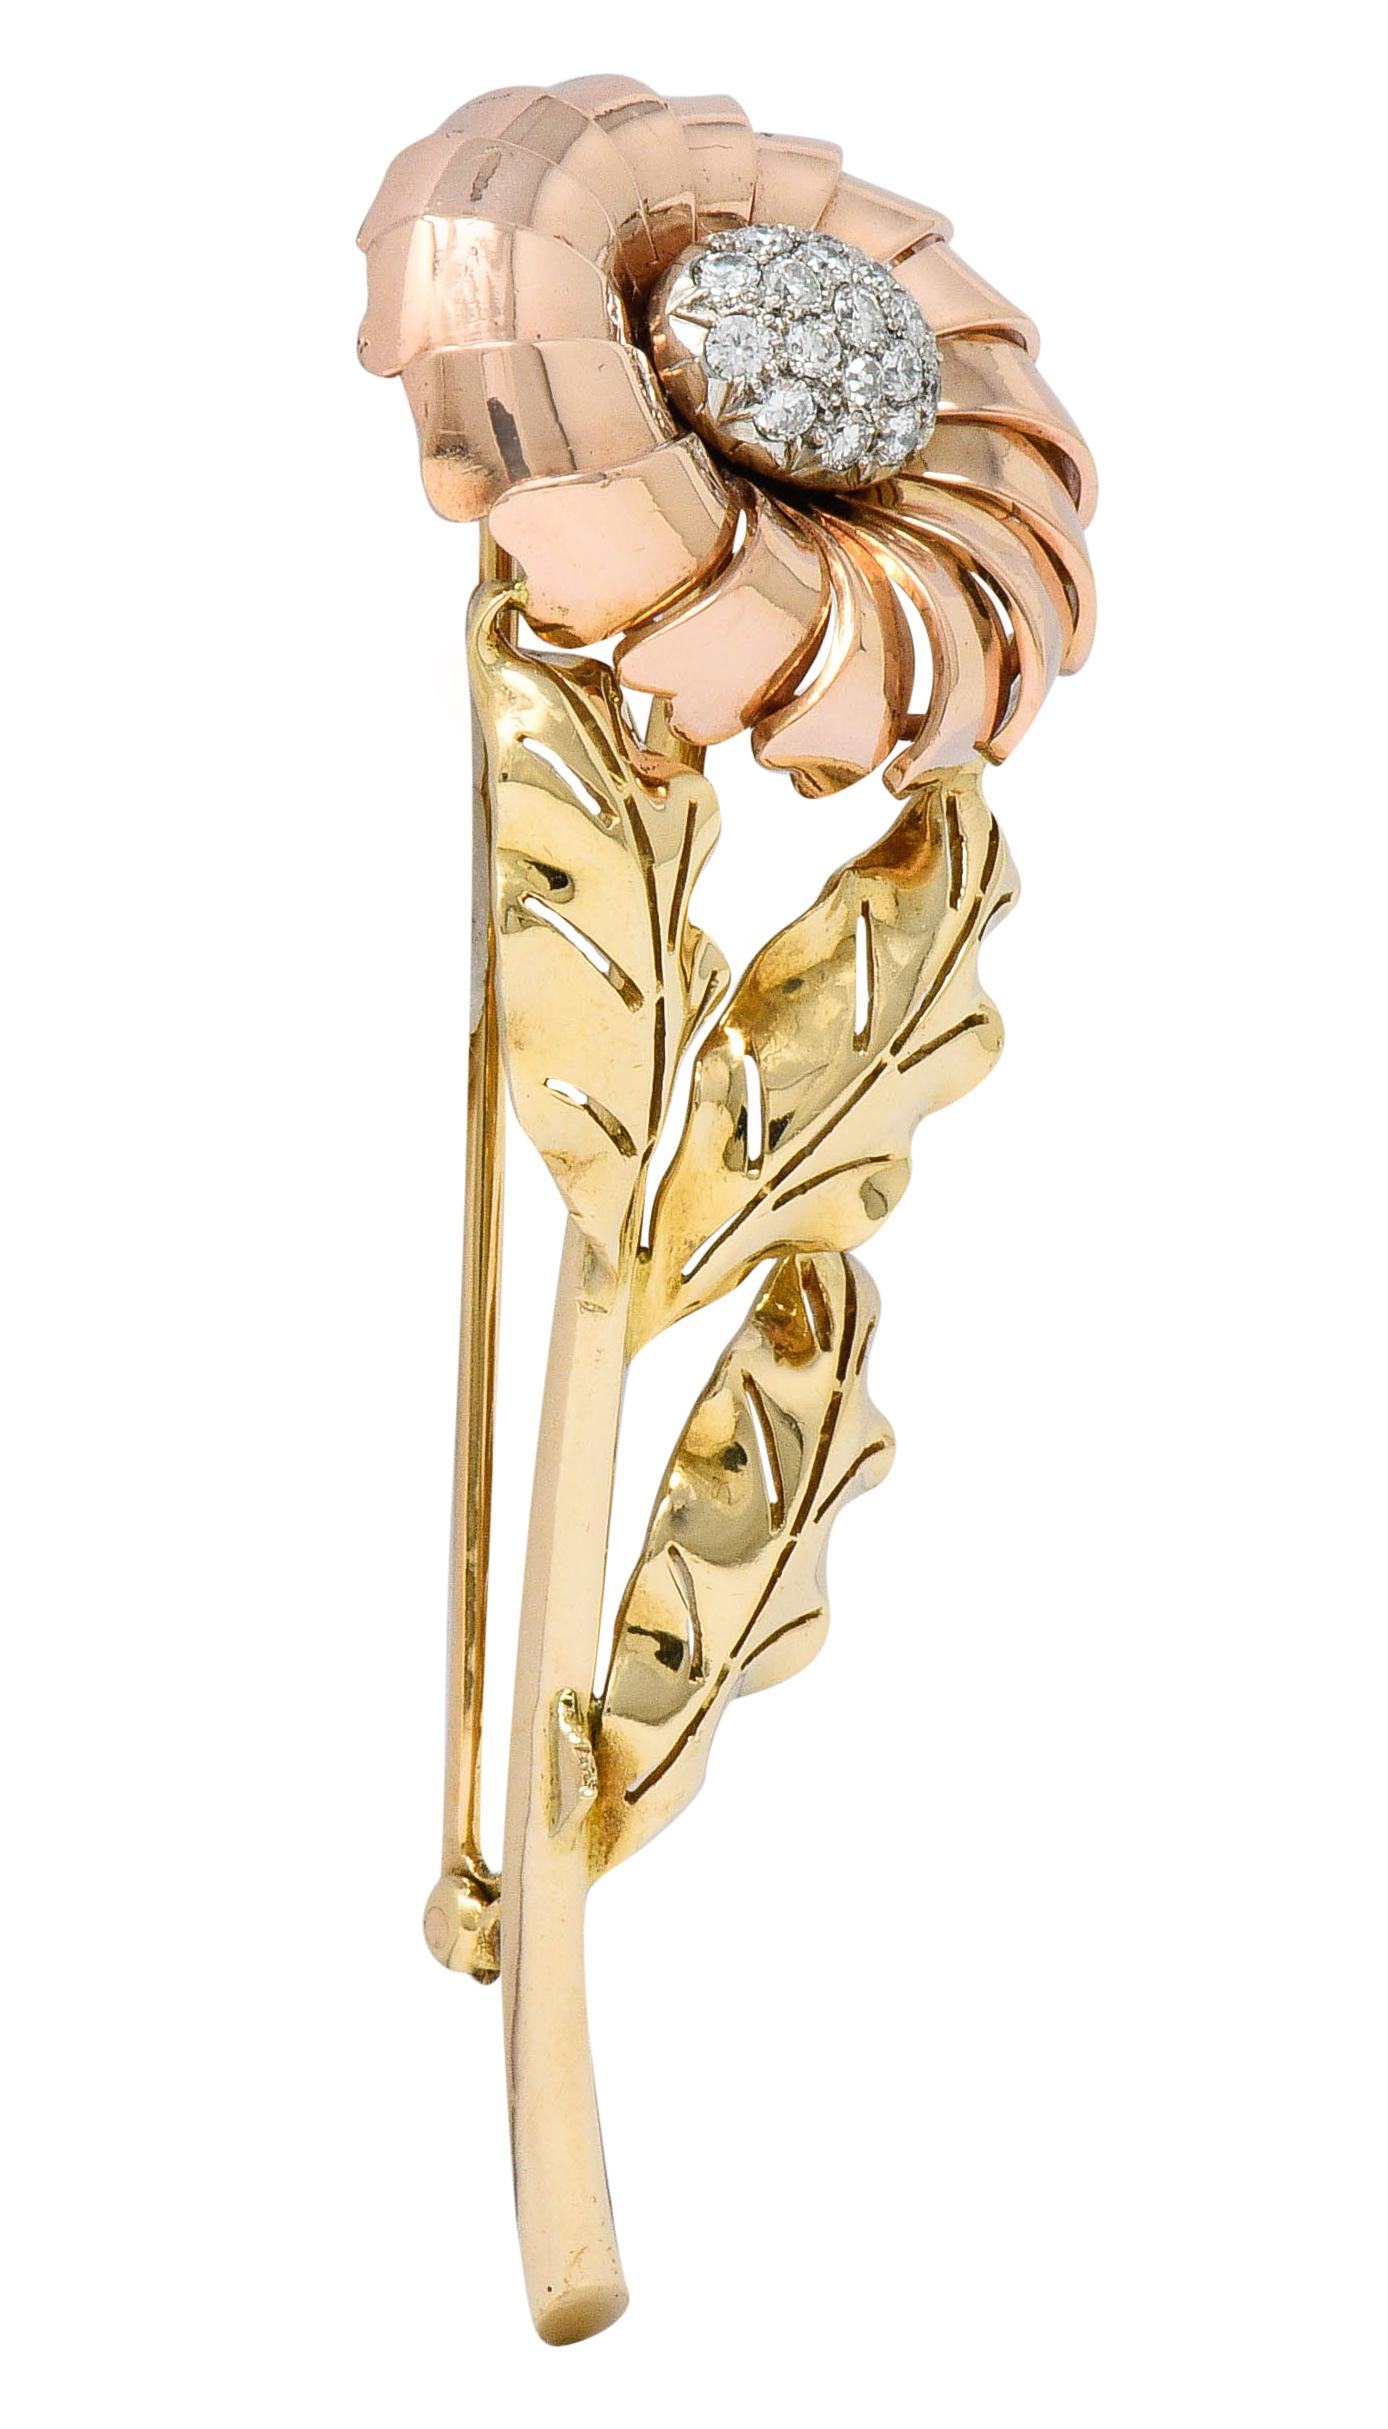 Brooch is designed as a tri-gold flower with an elongated yellow gold stem

Petals dramatically tier and radiate as polished rose gold

Accented by three stylized and pierced leaves branching from stem; polished green gold

With a pavè center of